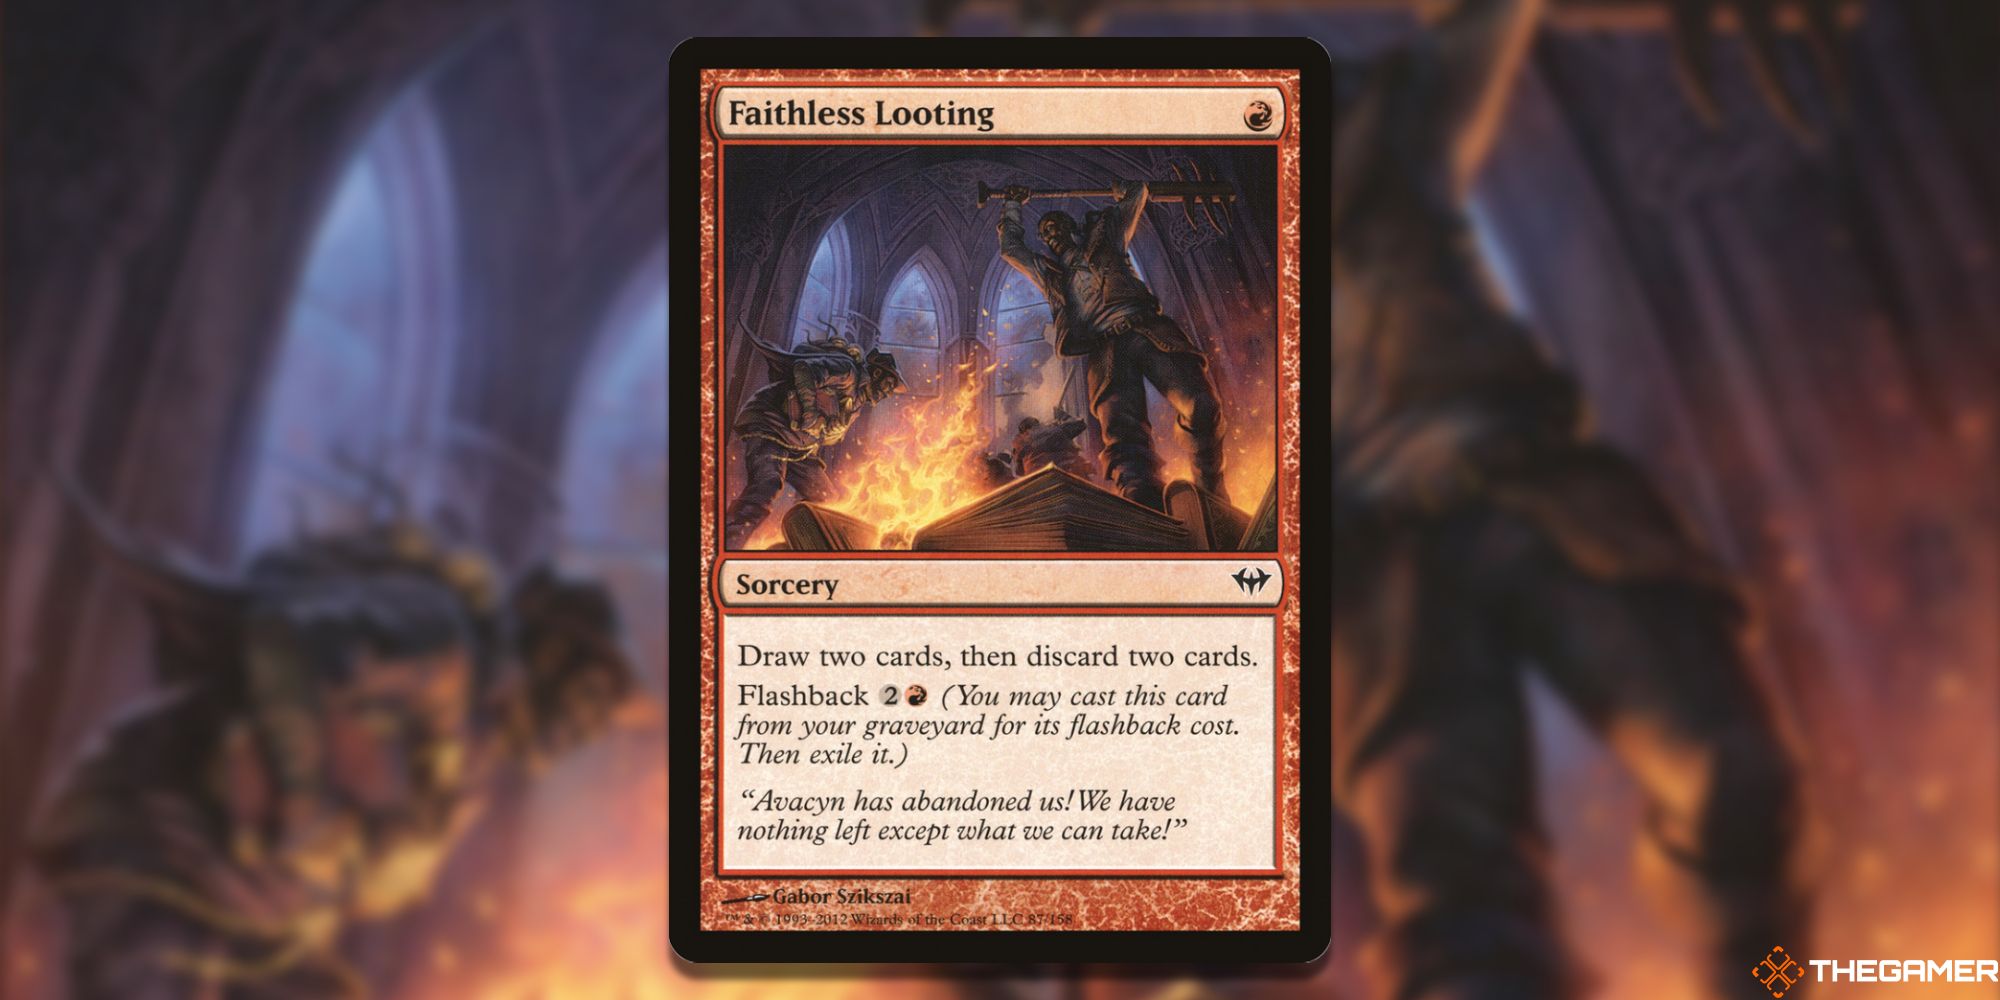 Image of the Faithless Looting card in Magic: The Gathering, with art by Gabor Szikszai